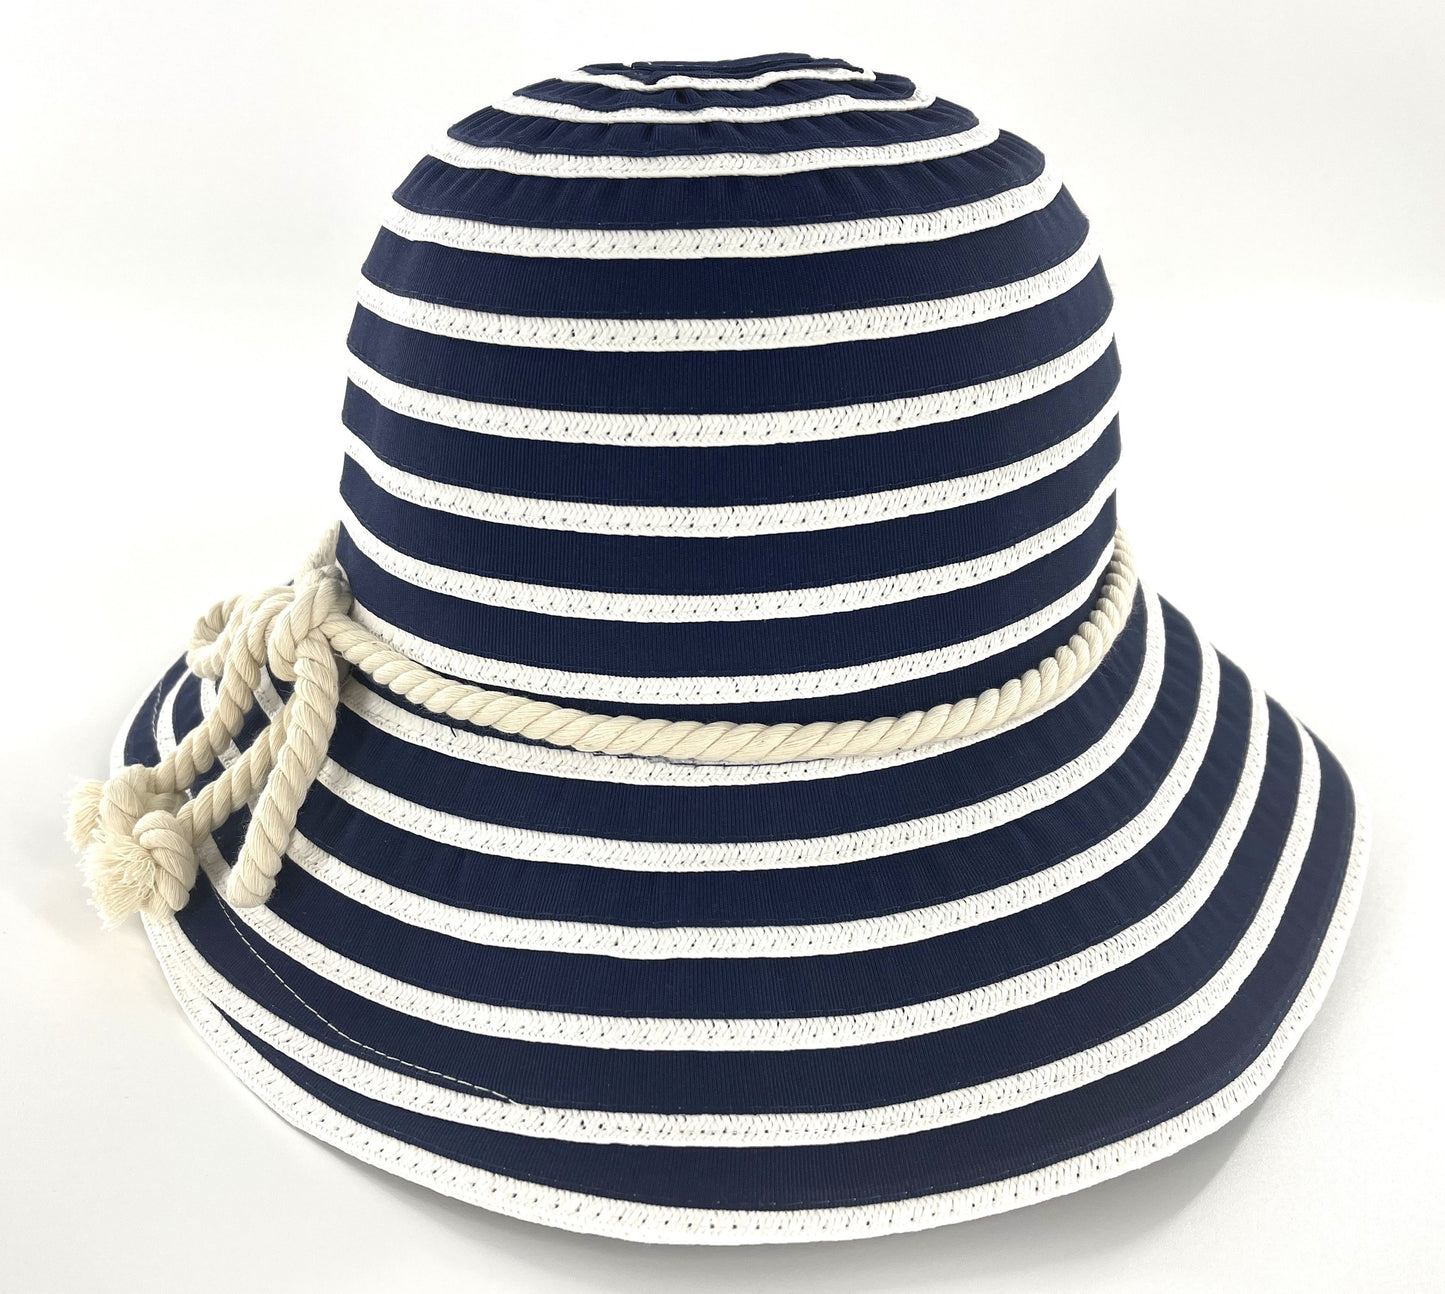 Ladies Wide Brimmed Blue and White Floppy Summer Sun Hat with Rope Bow